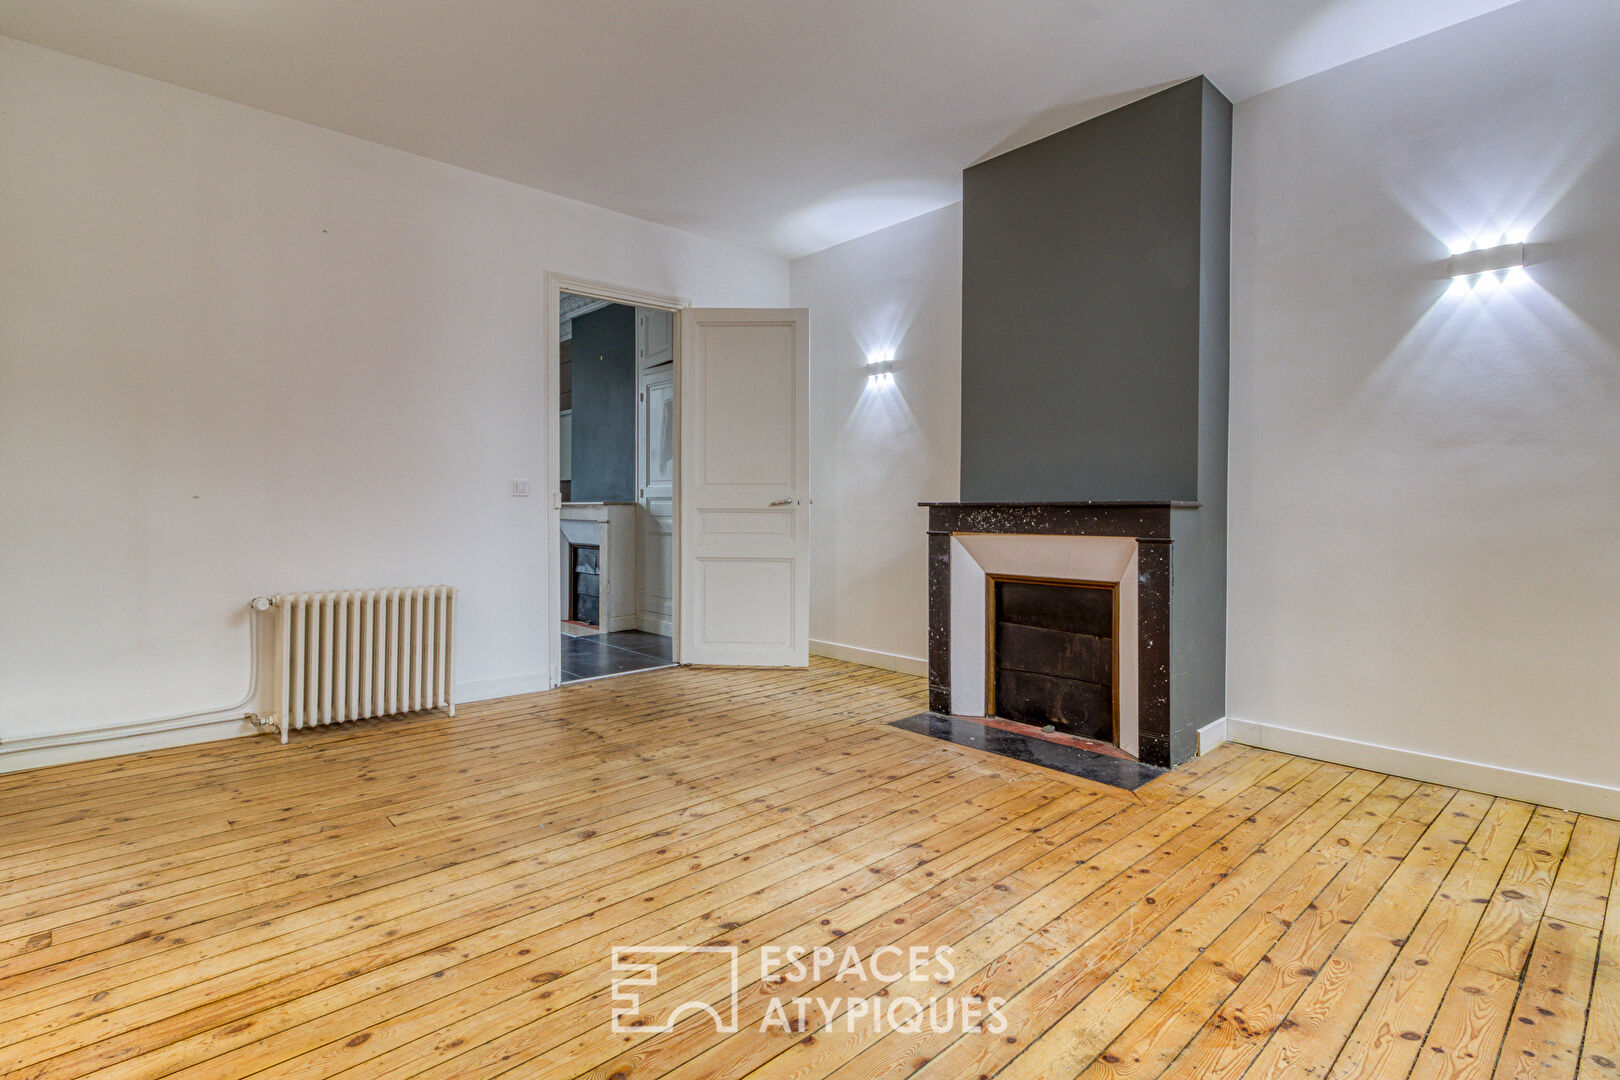 Beautiful renovated bourgeois house in Henriville district